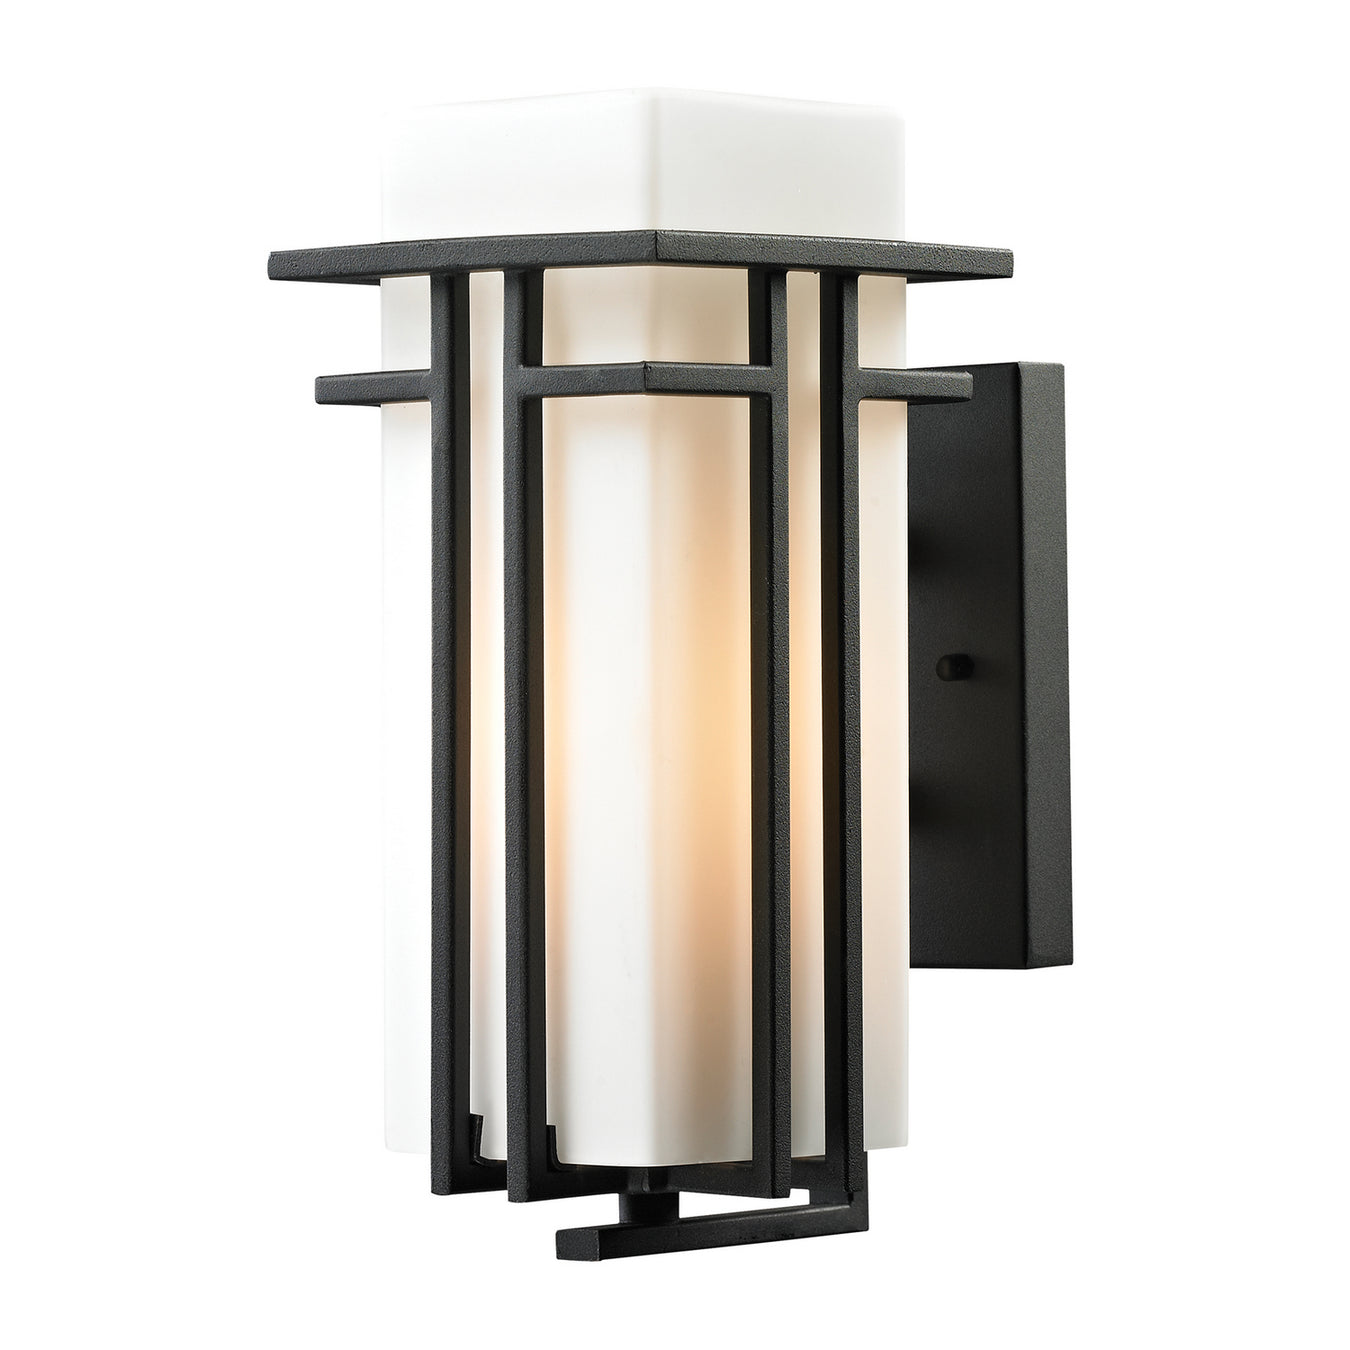 Croftwell 1-Light Outdoor Sconce